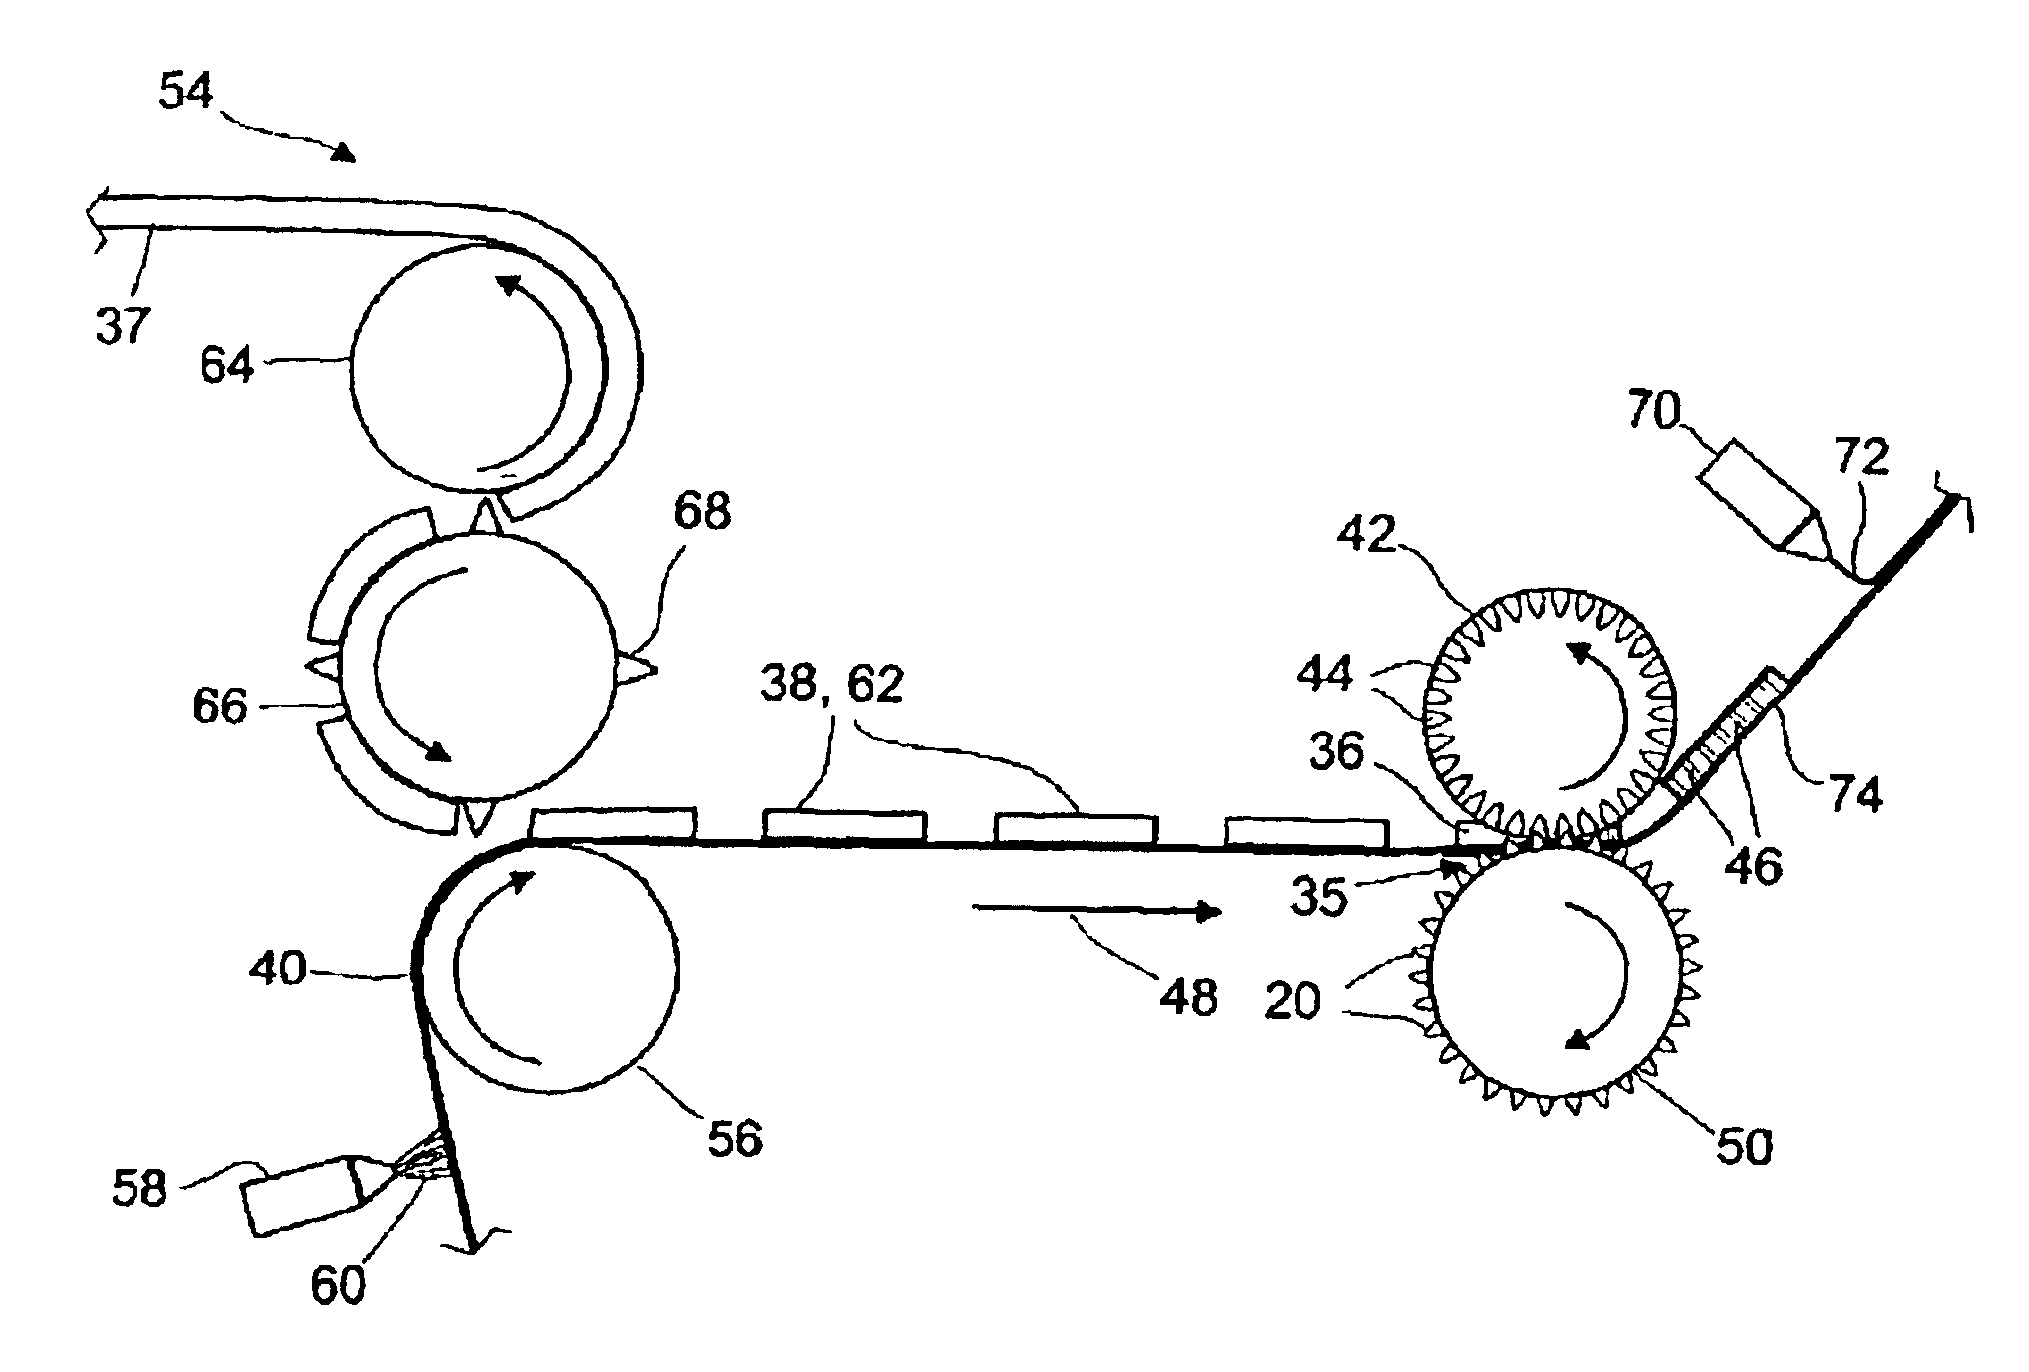 System for aperturing and coaperturing webs and web assemblies